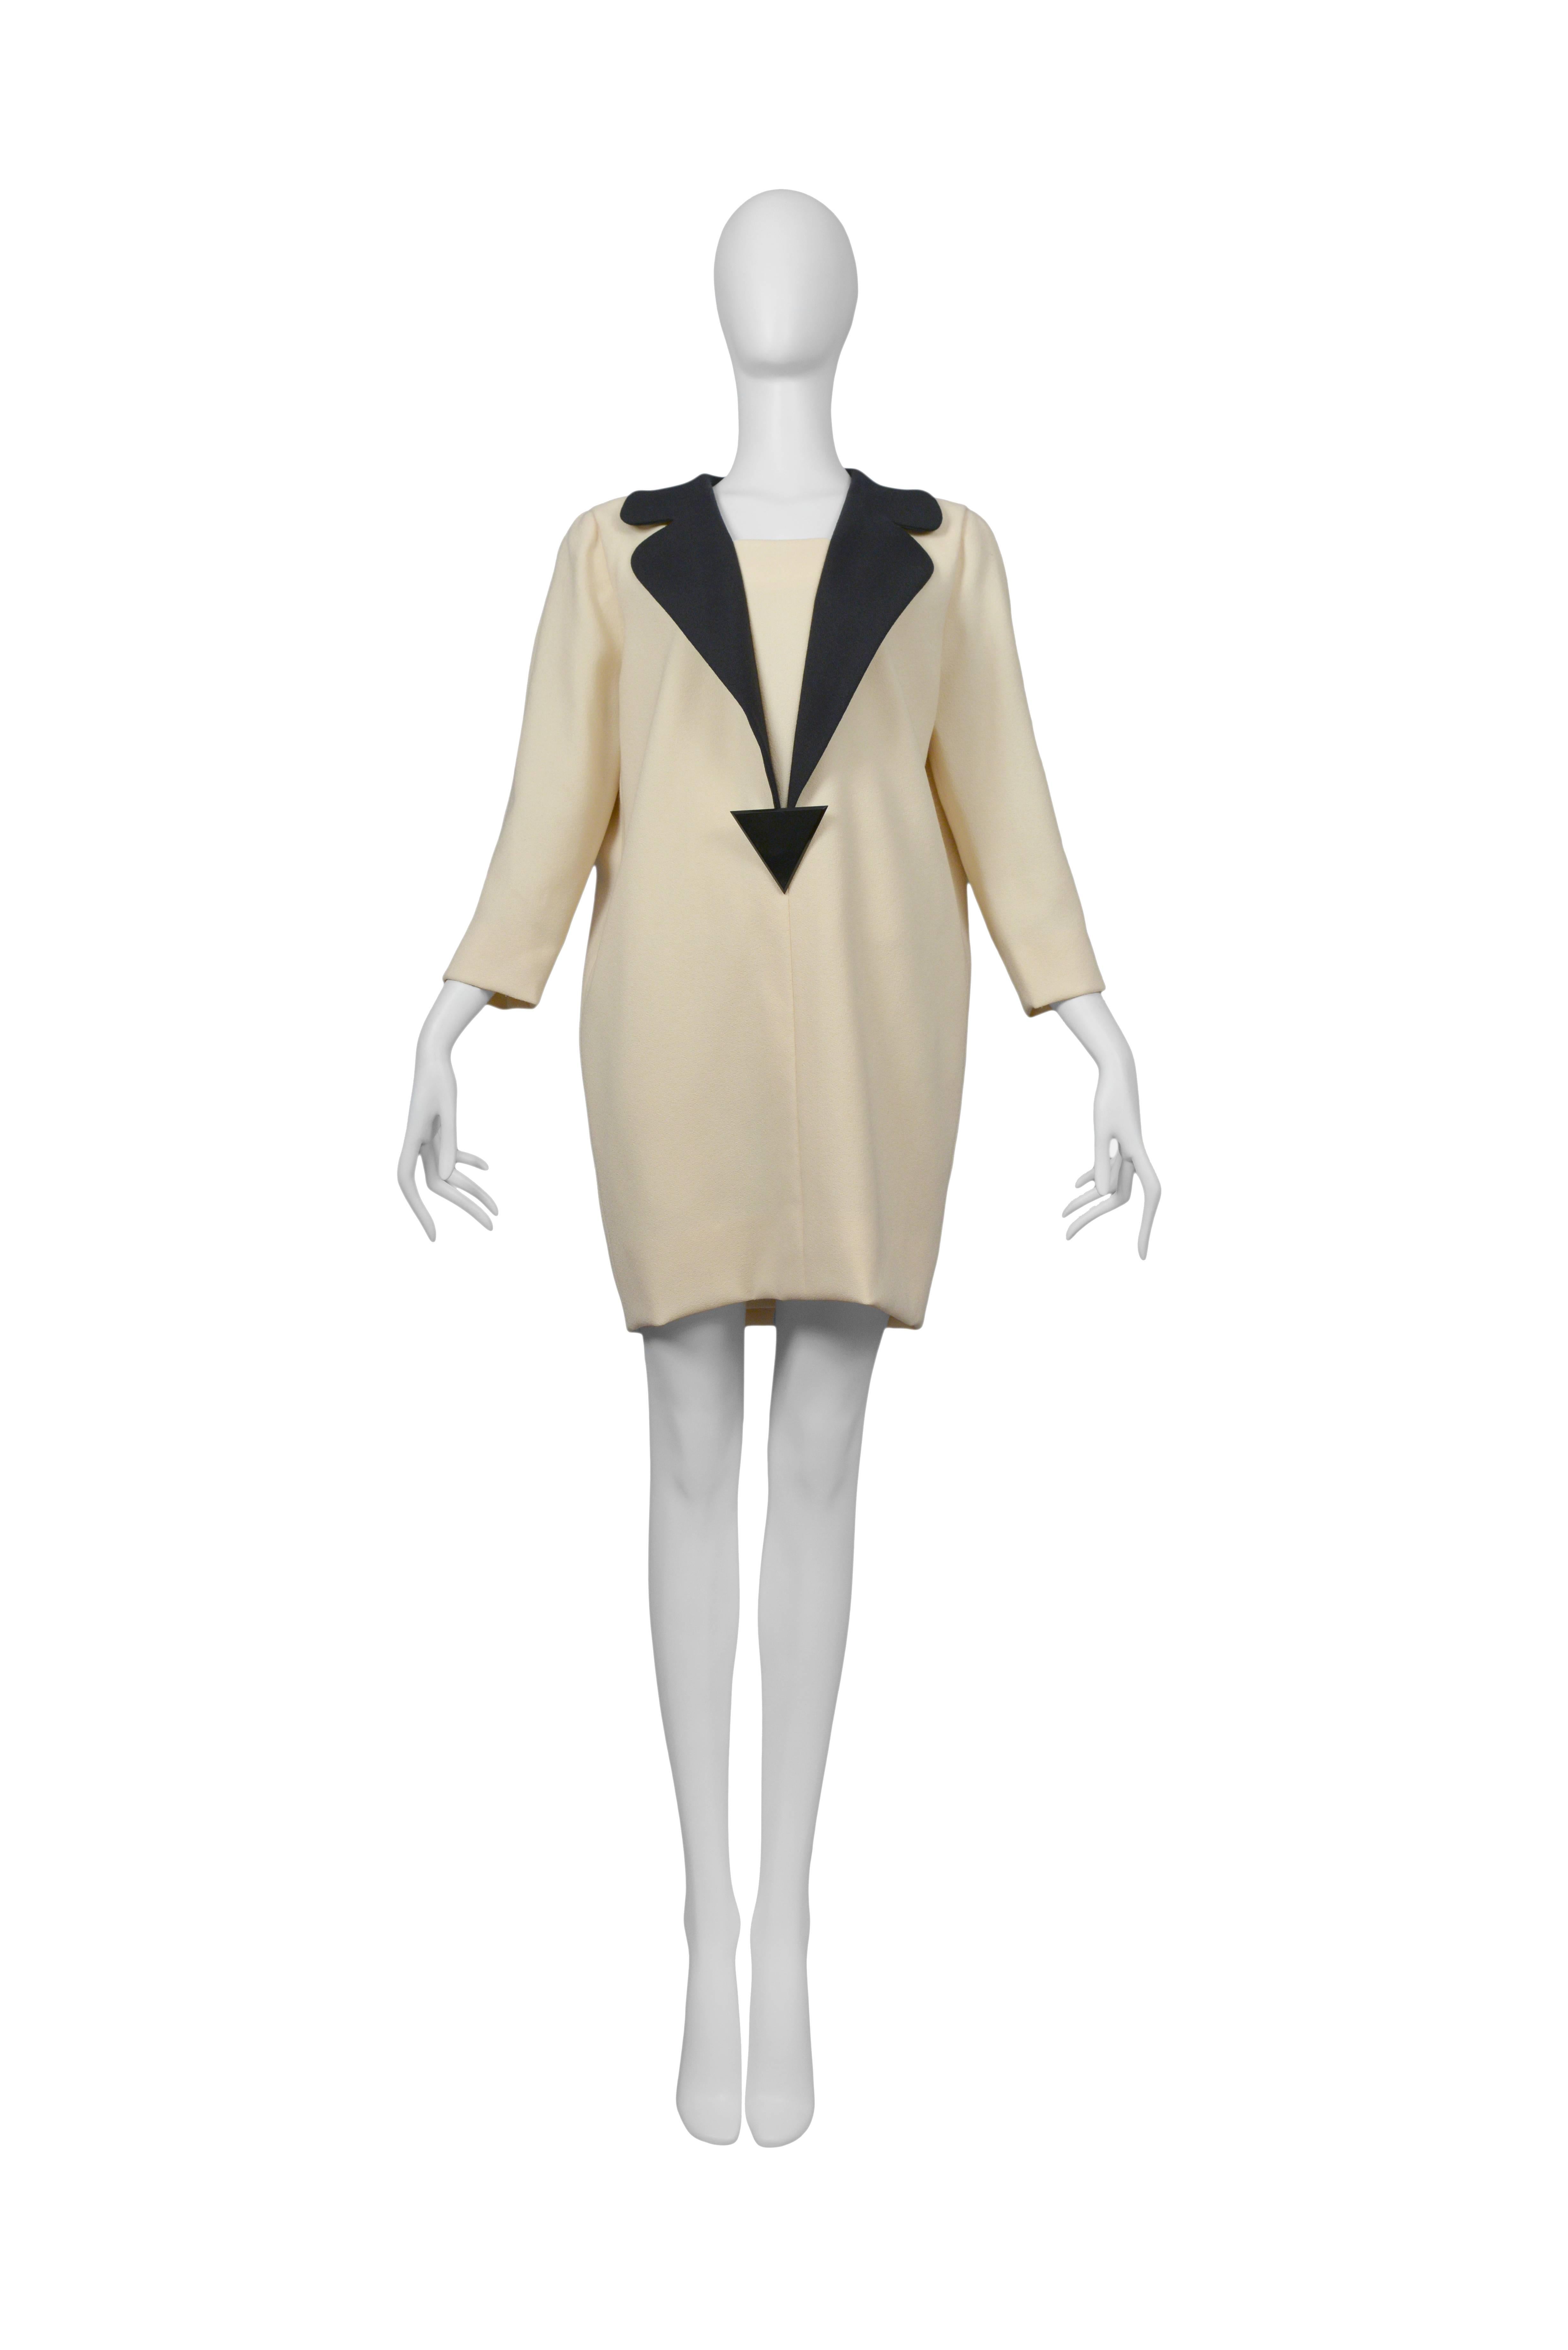 Pierre Cardin Couture smart off white dress with attached black lapels and black lucite triangle decoration. Circa, 1986 -1993.
Please inquire for additional images.